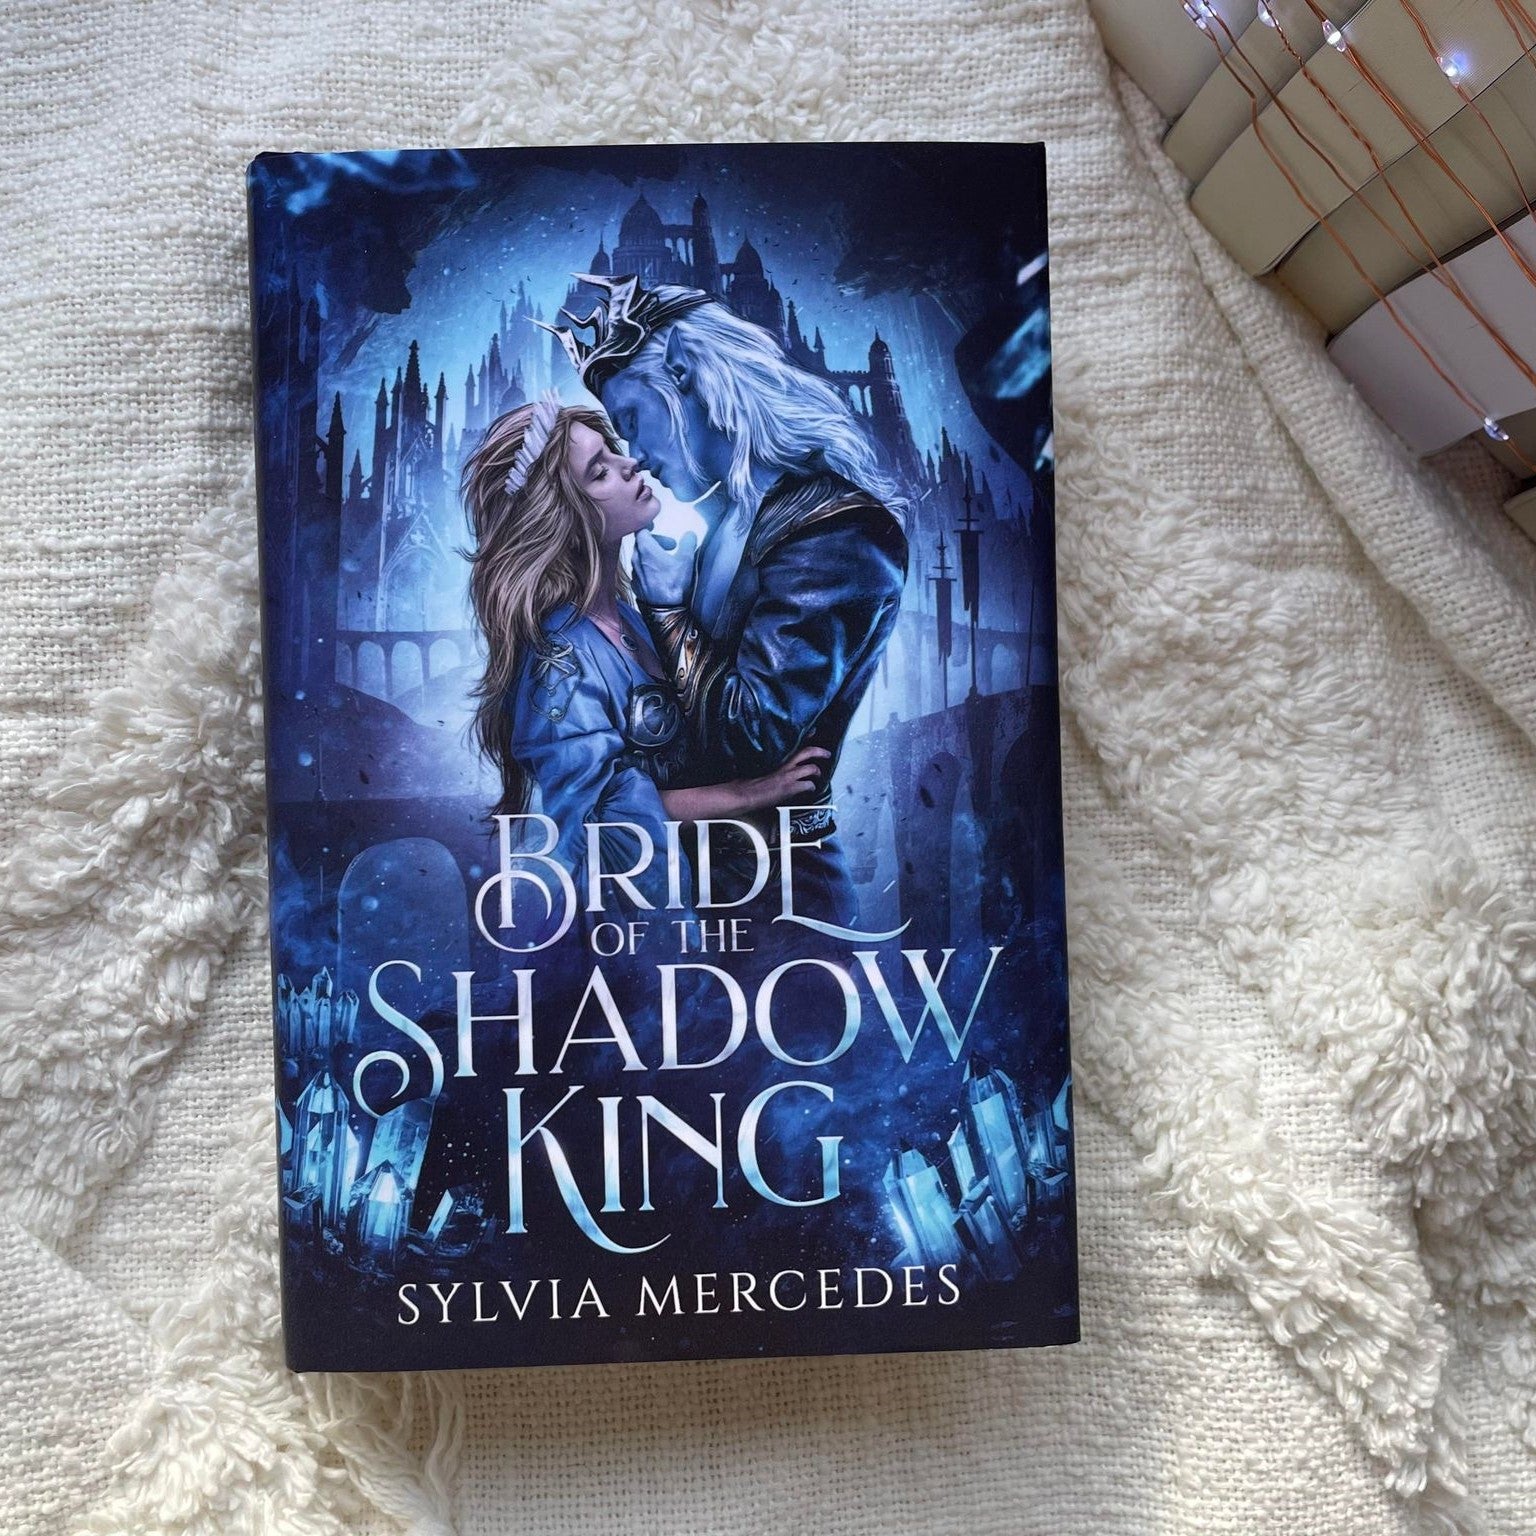 Bride of the Shadow King by Sylvia Mercedes